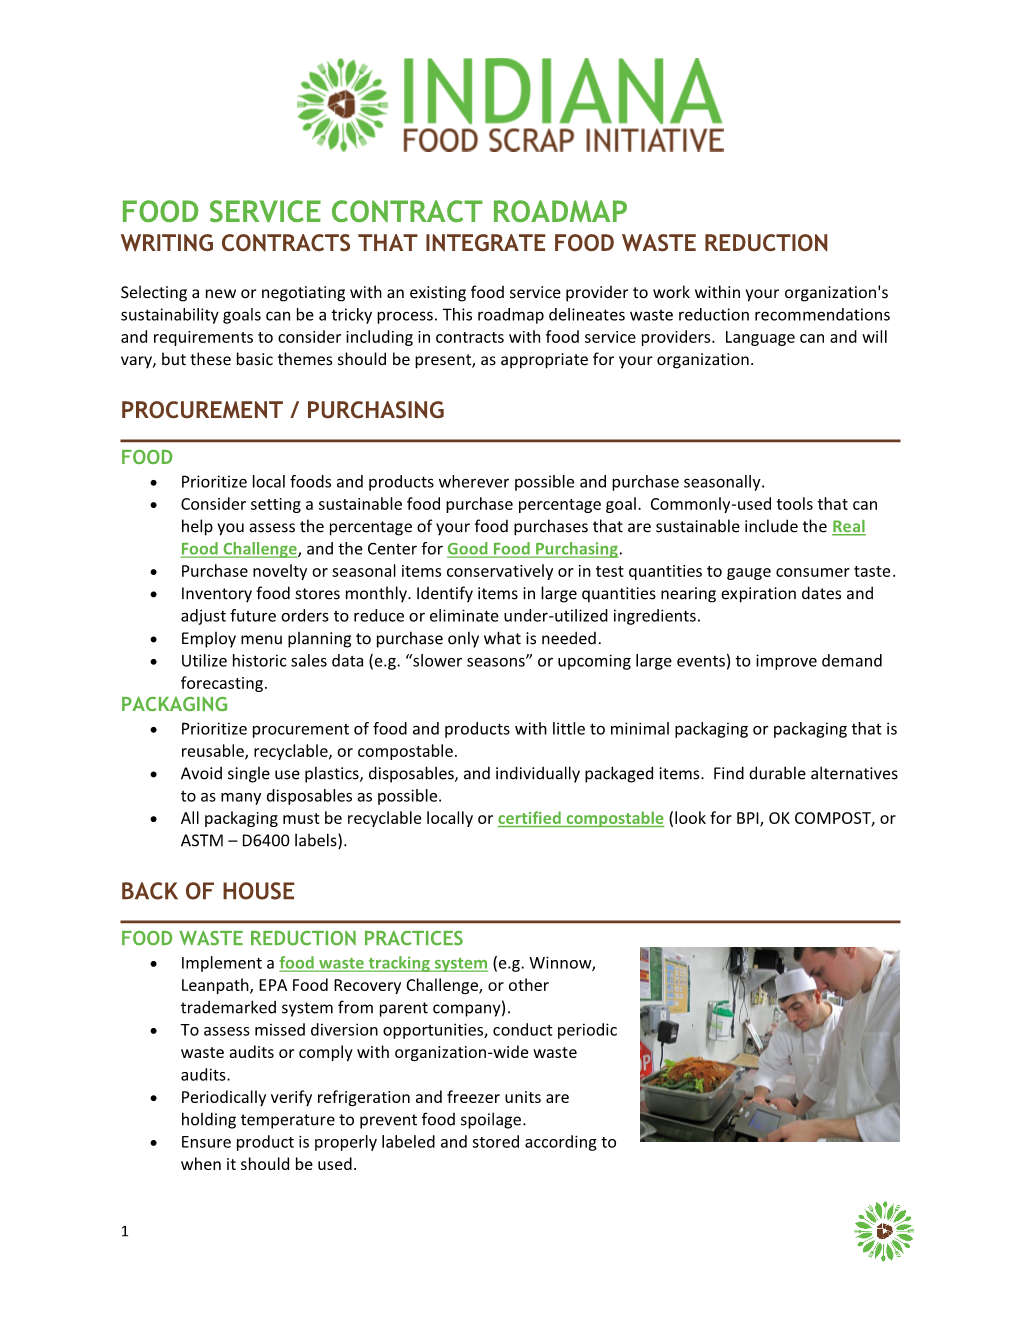 Food Service Contract Roadmap Writing Contracts That Integrate Food Waste Reduction